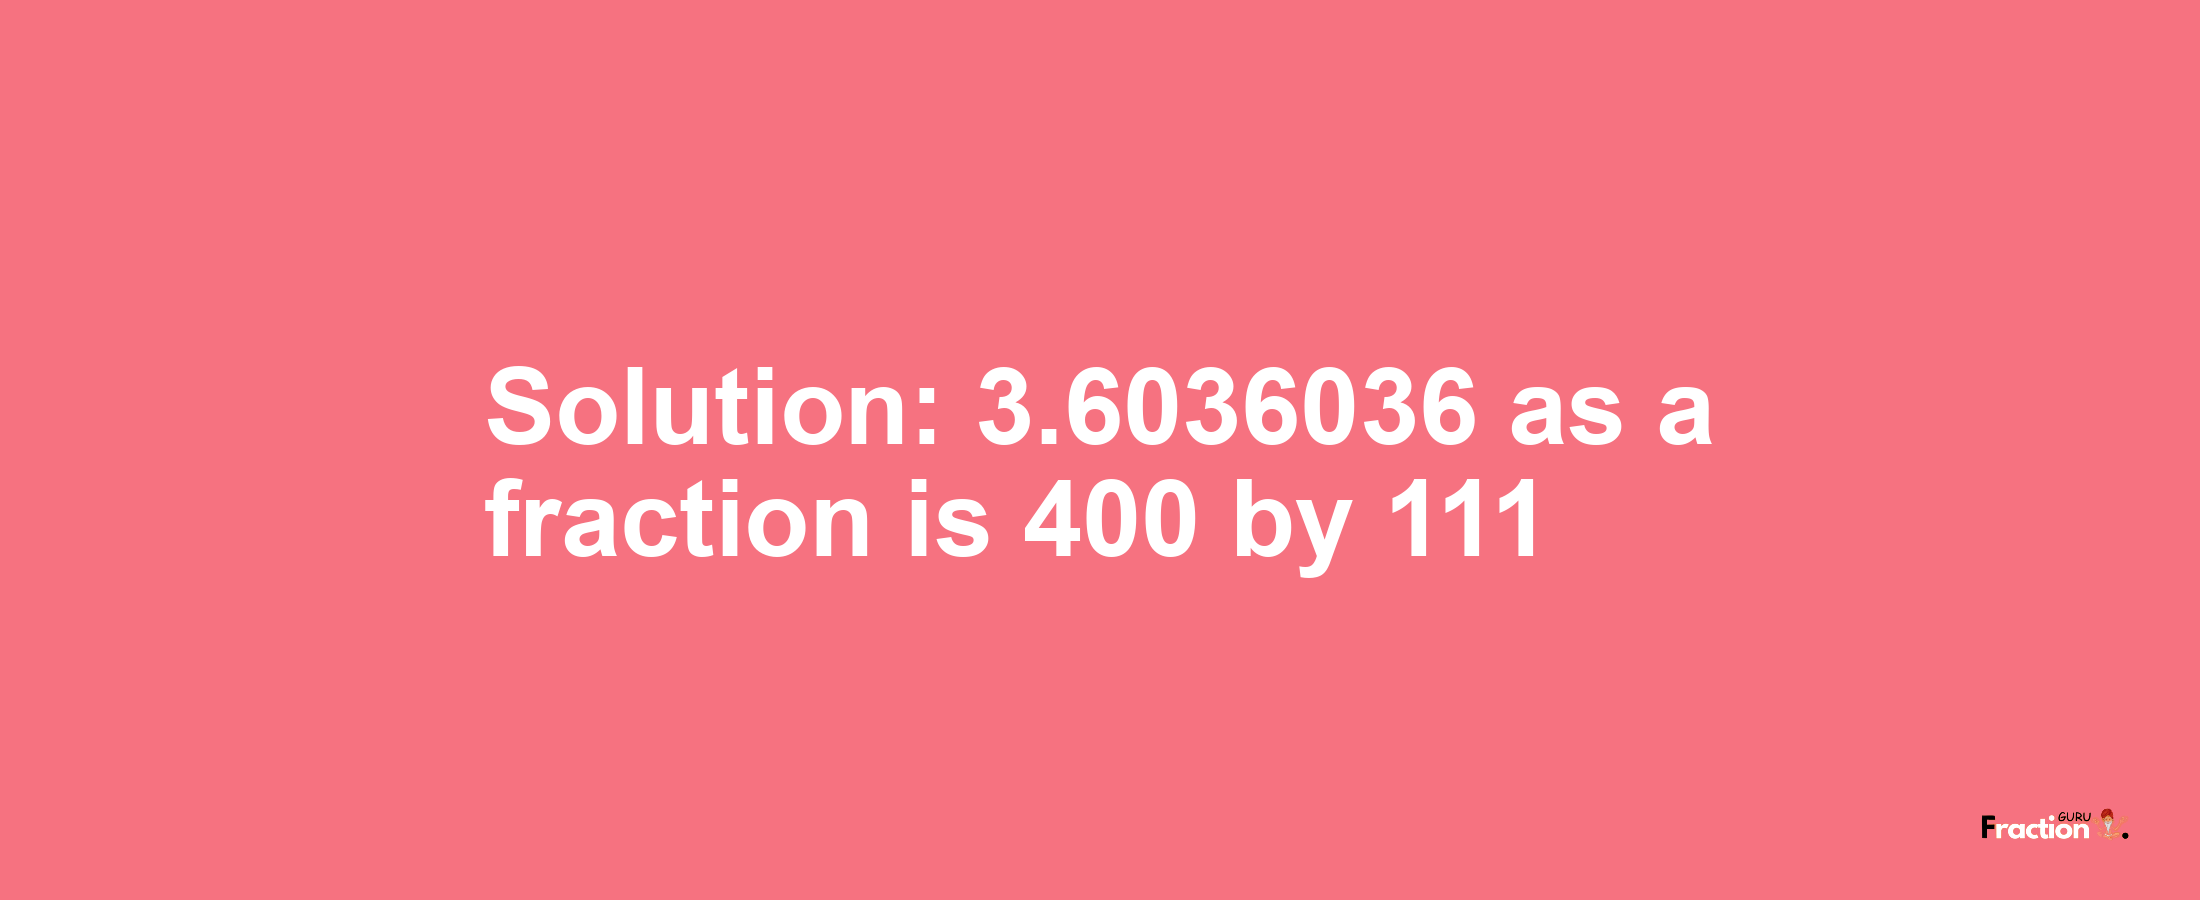 Solution:3.6036036 as a fraction is 400/111